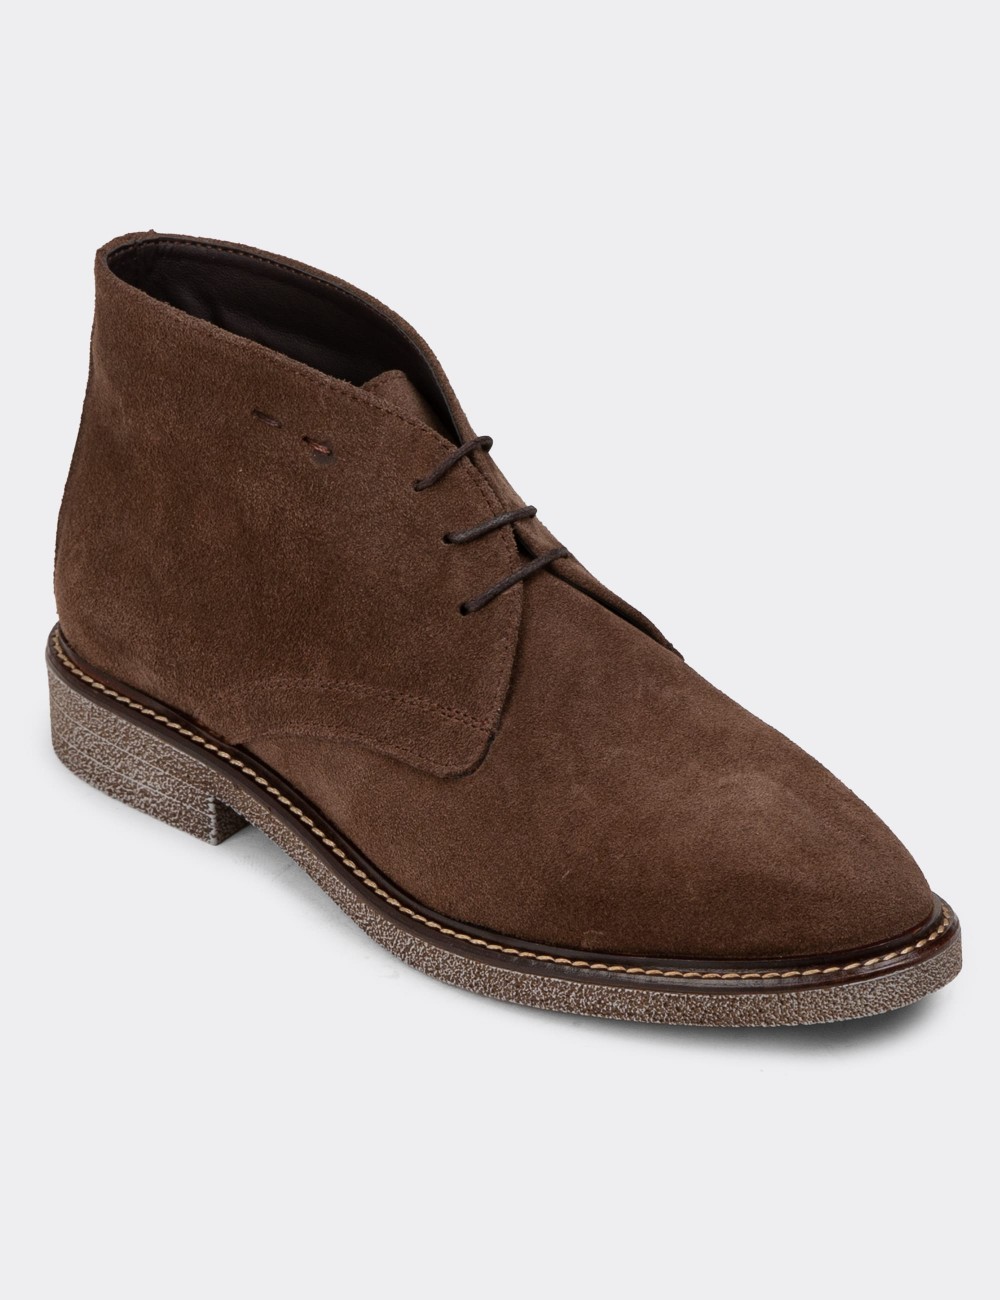 Brown Suede Leather Desert Boots - 01967ZKHVC02